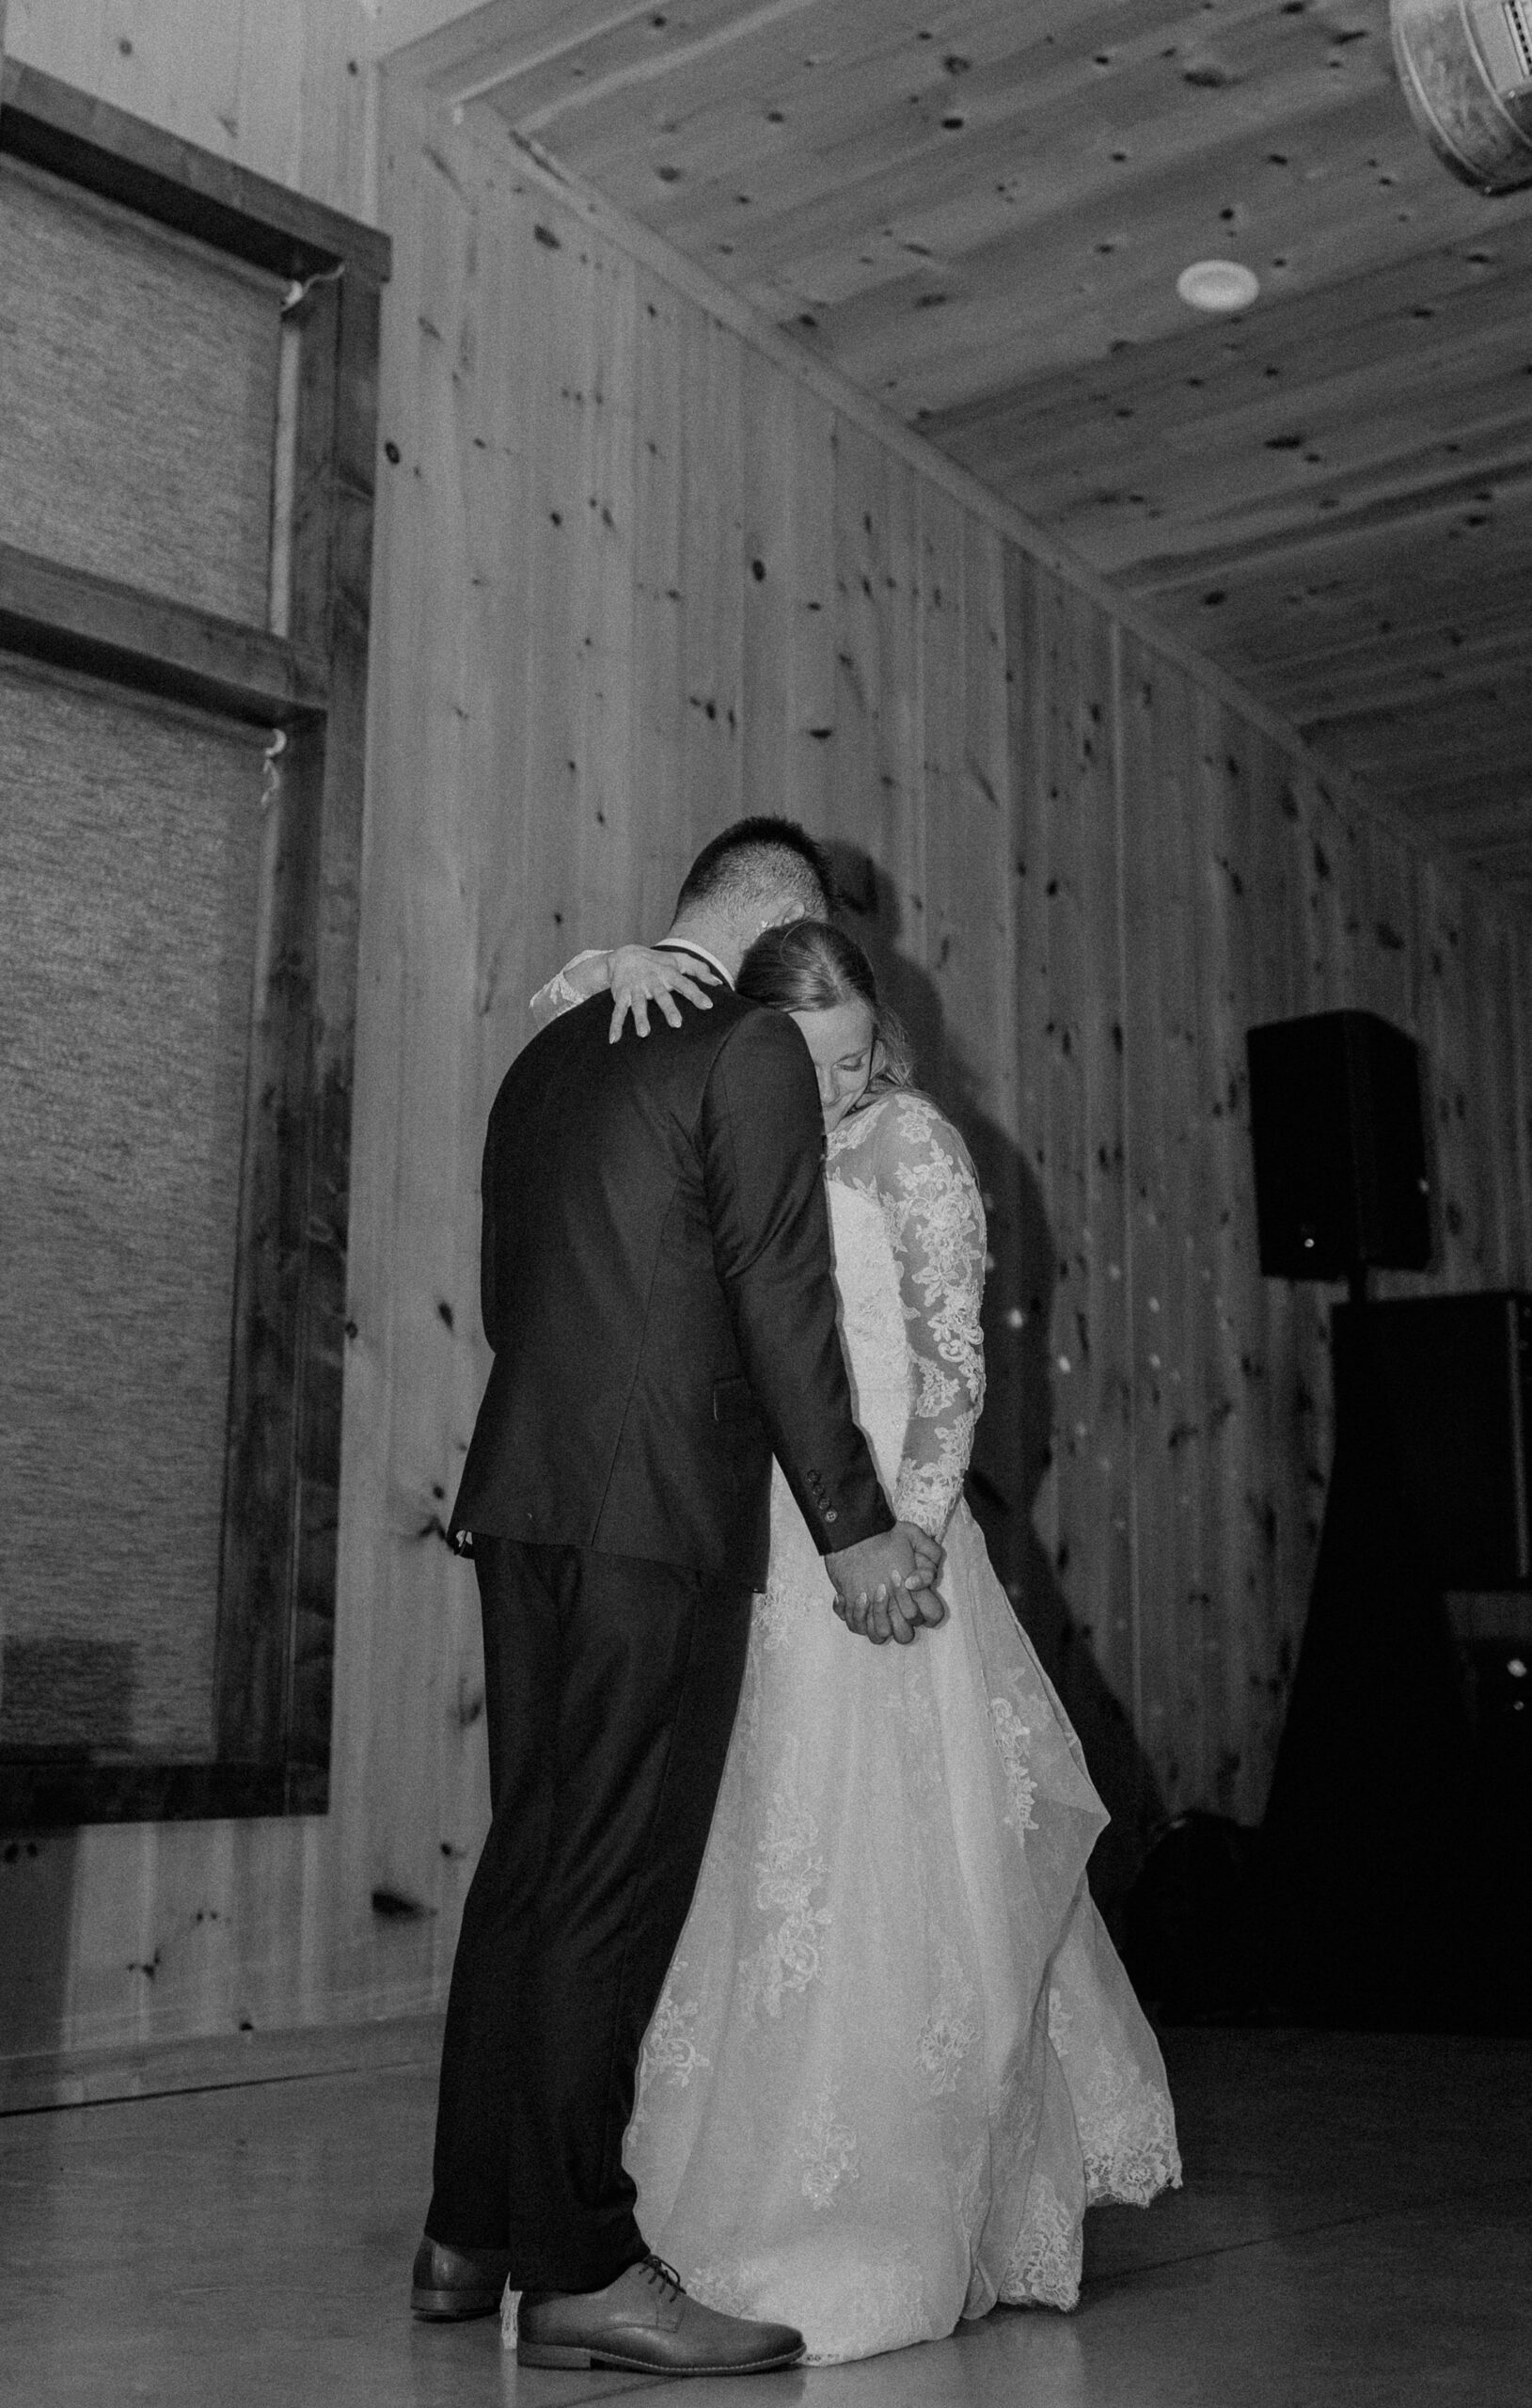 bride and groom first dance at end of the night